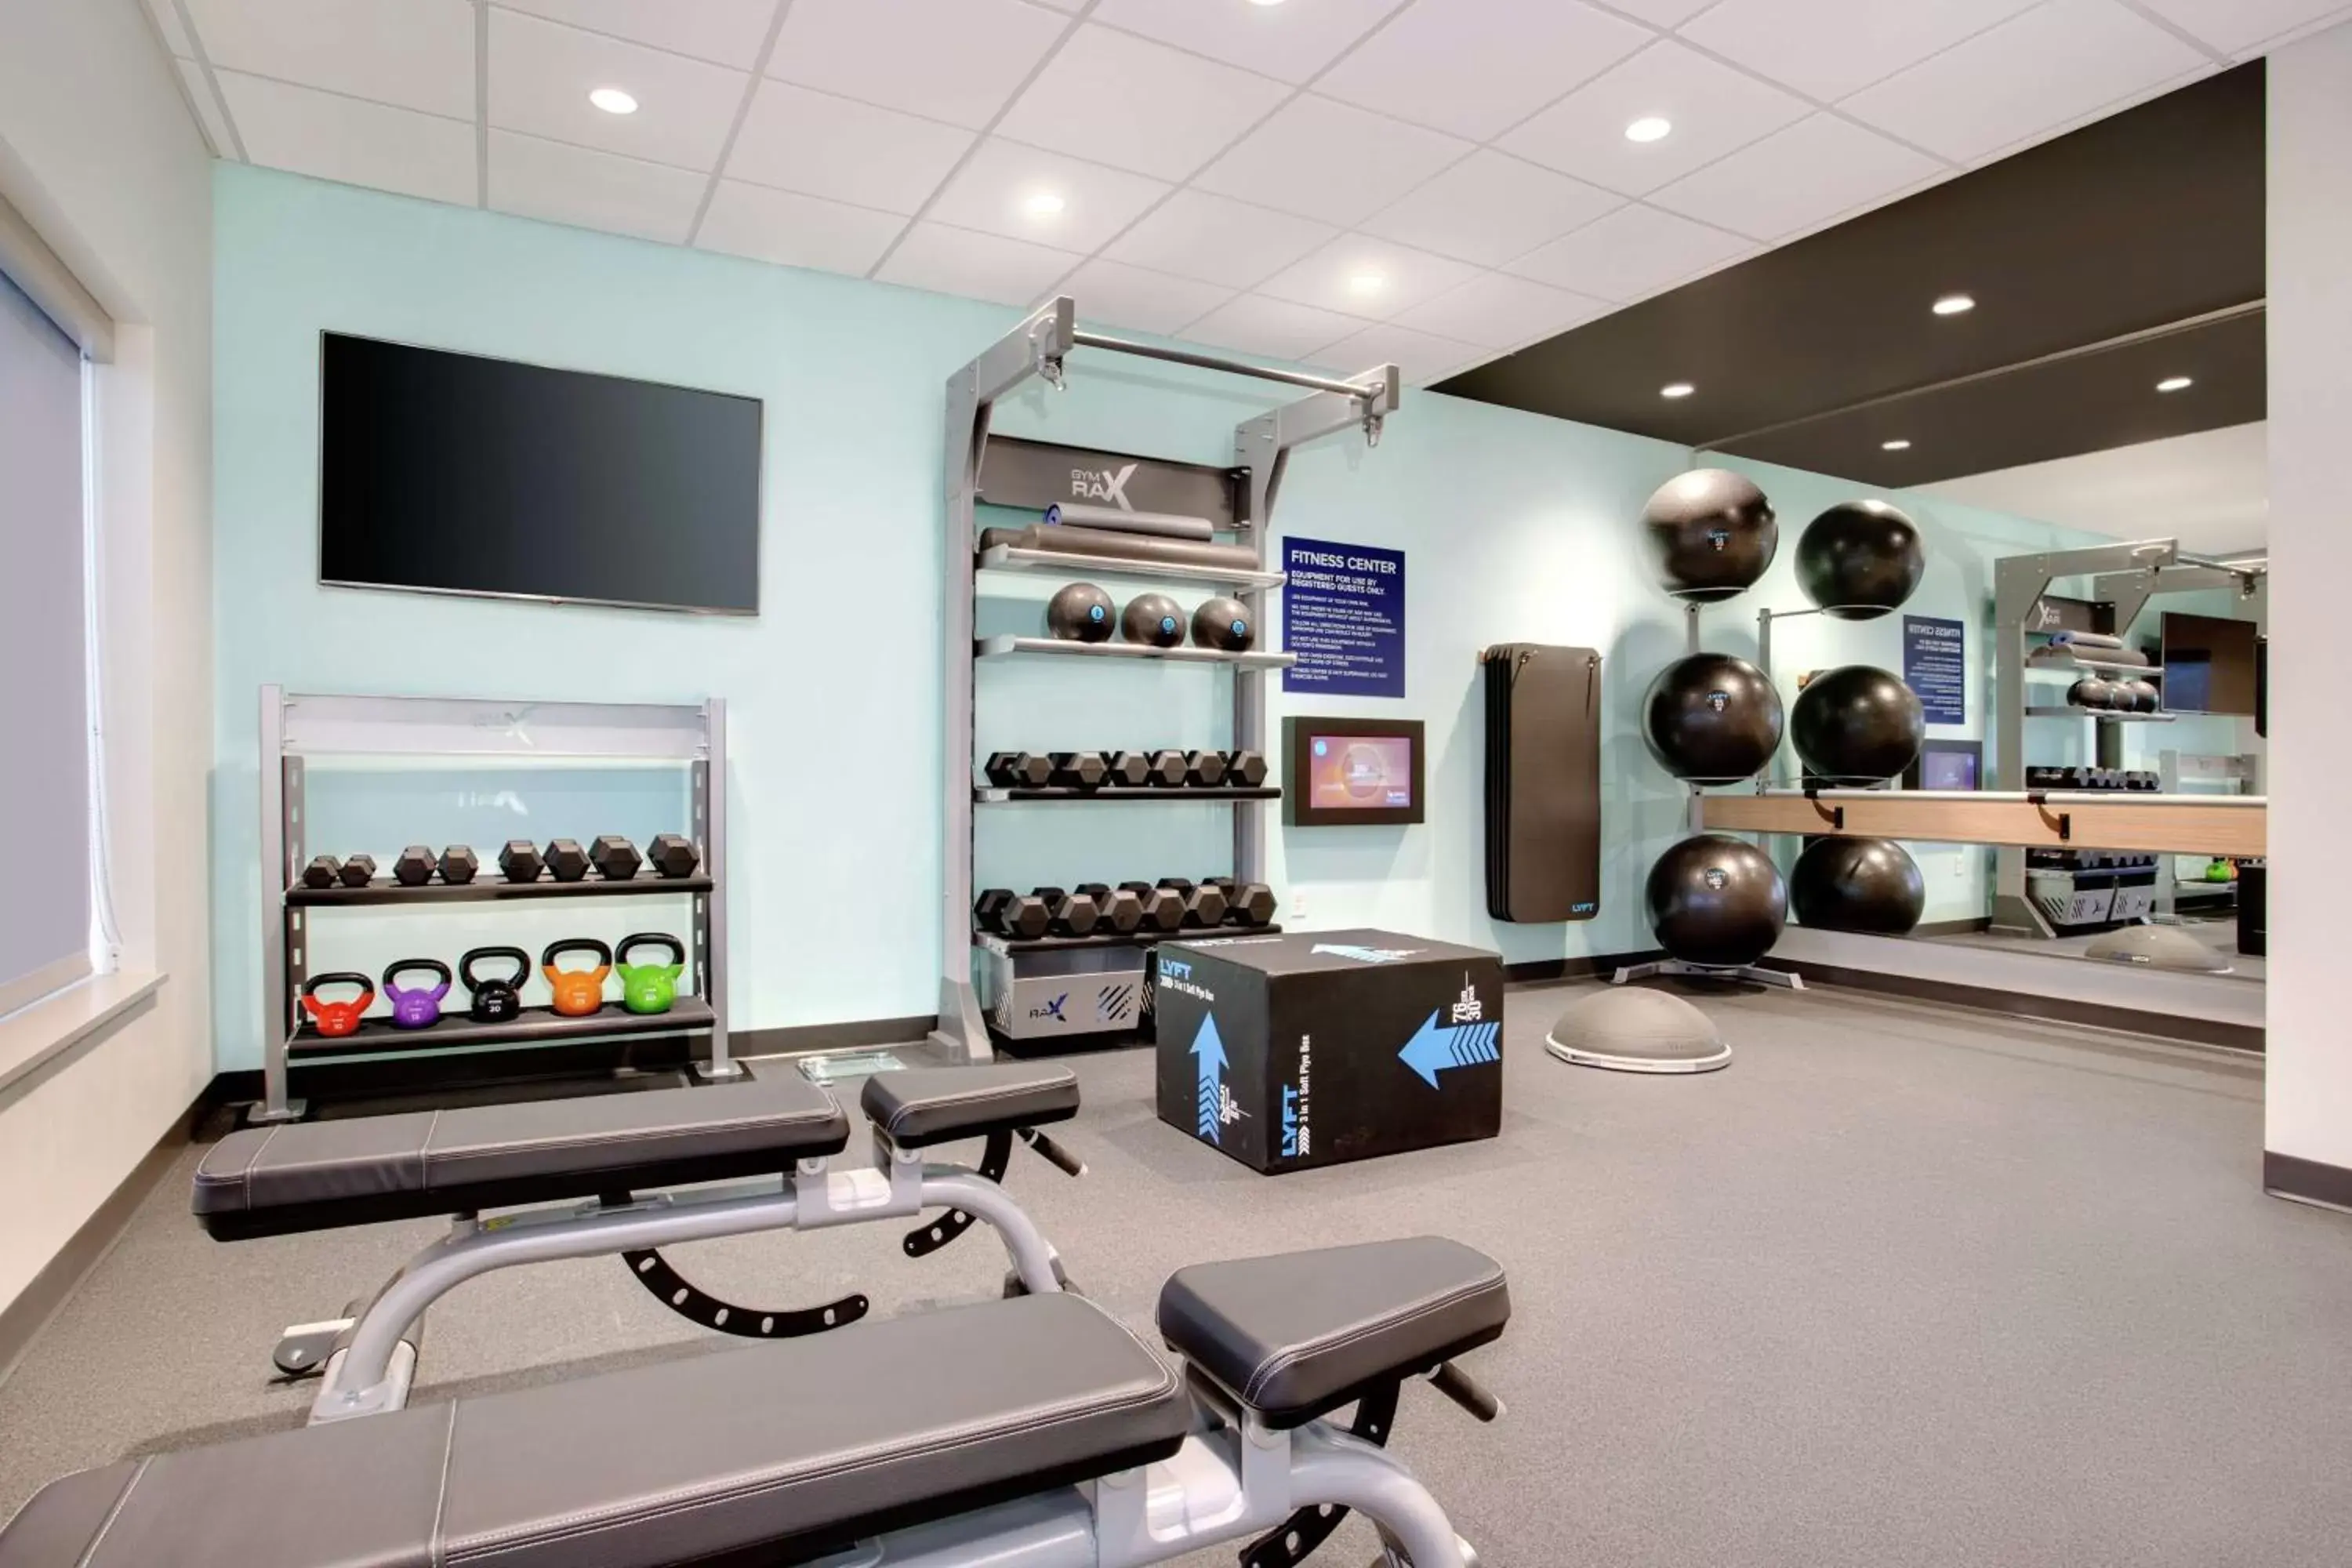 Fitness centre/facilities, Fitness Center/Facilities in Tru By Hilton Audubon Valley Forge